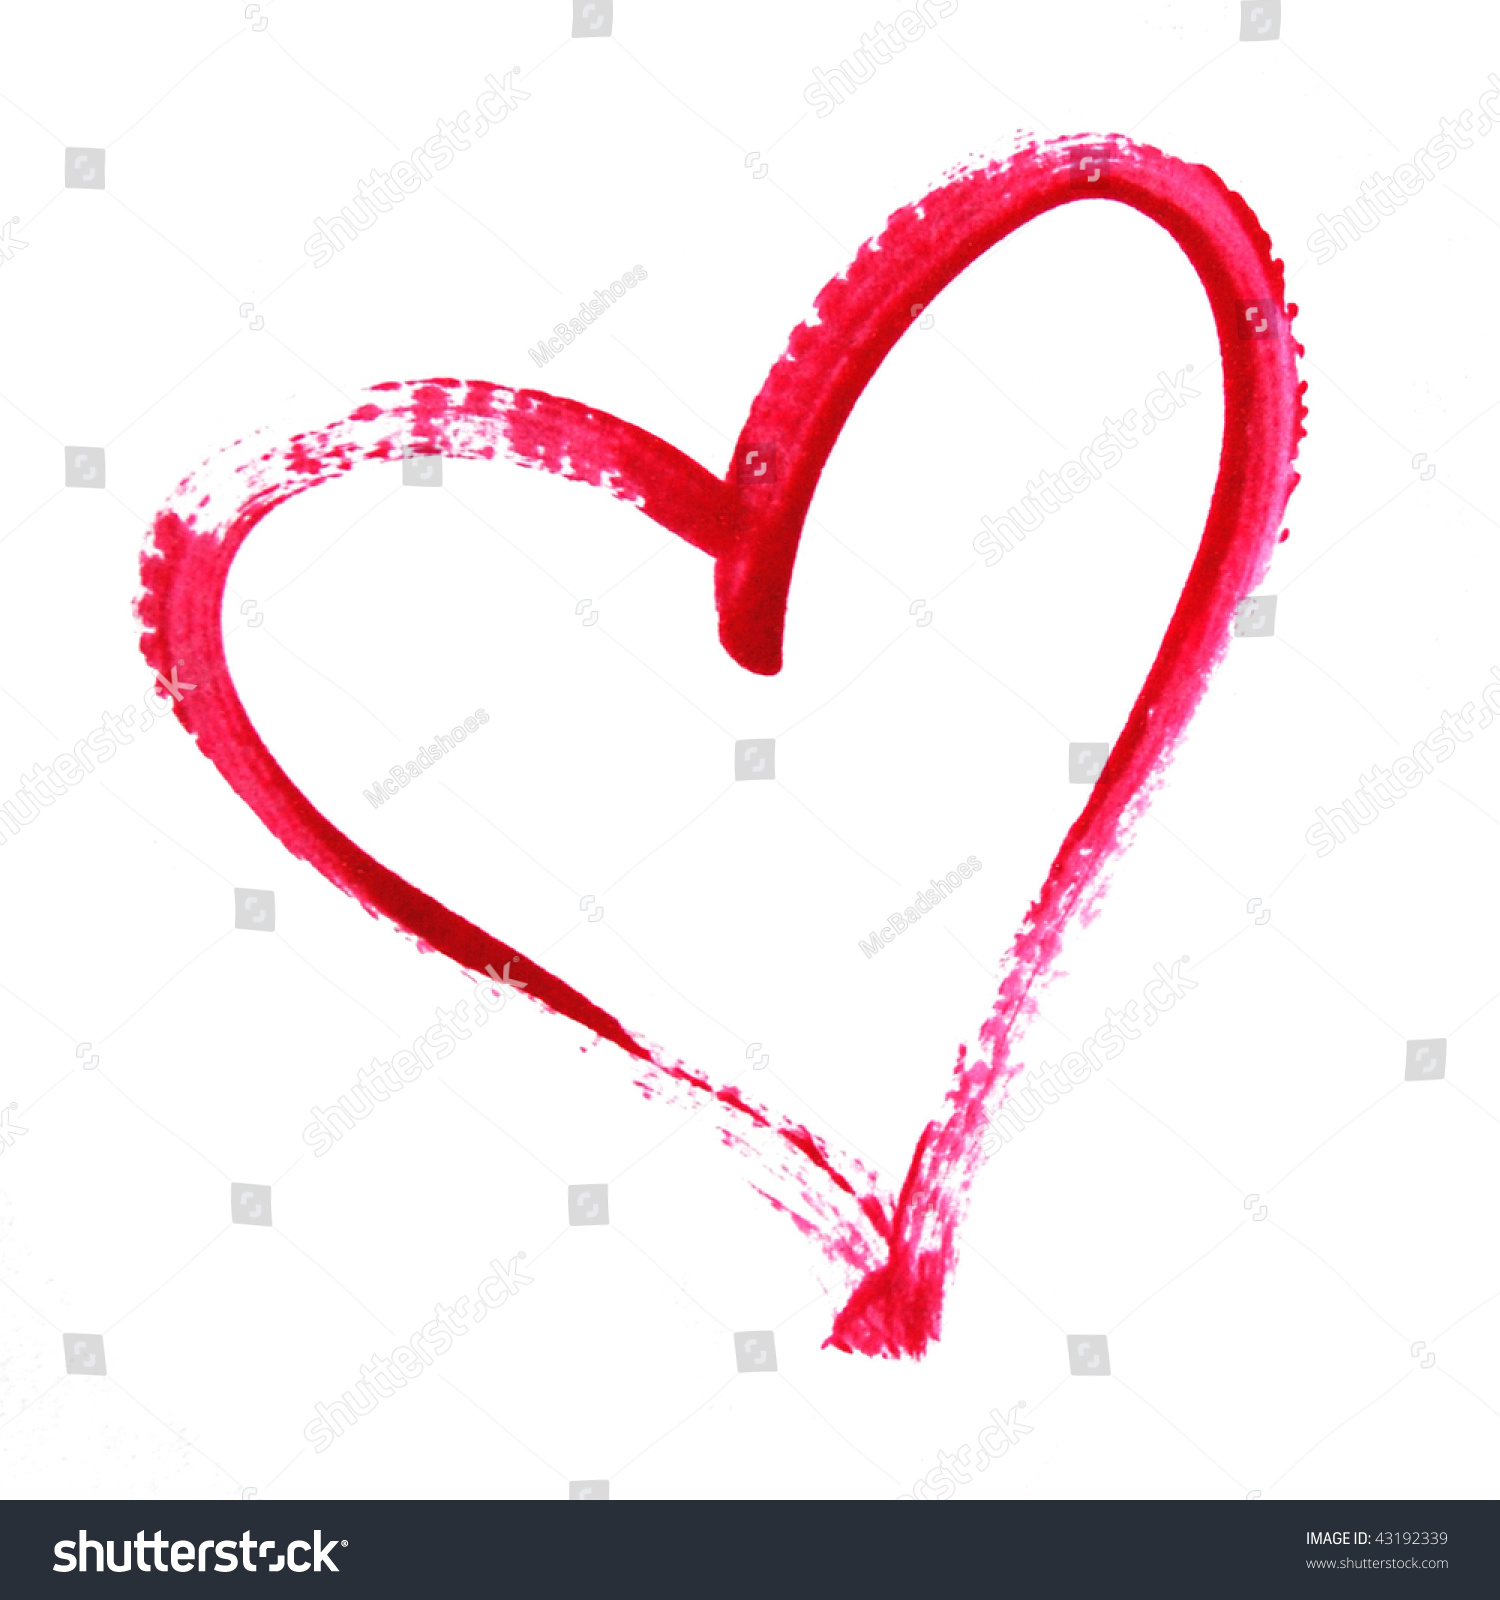 Painted Heart Outline Stock Photo & Image (Royalty-Free) 43192339 ...